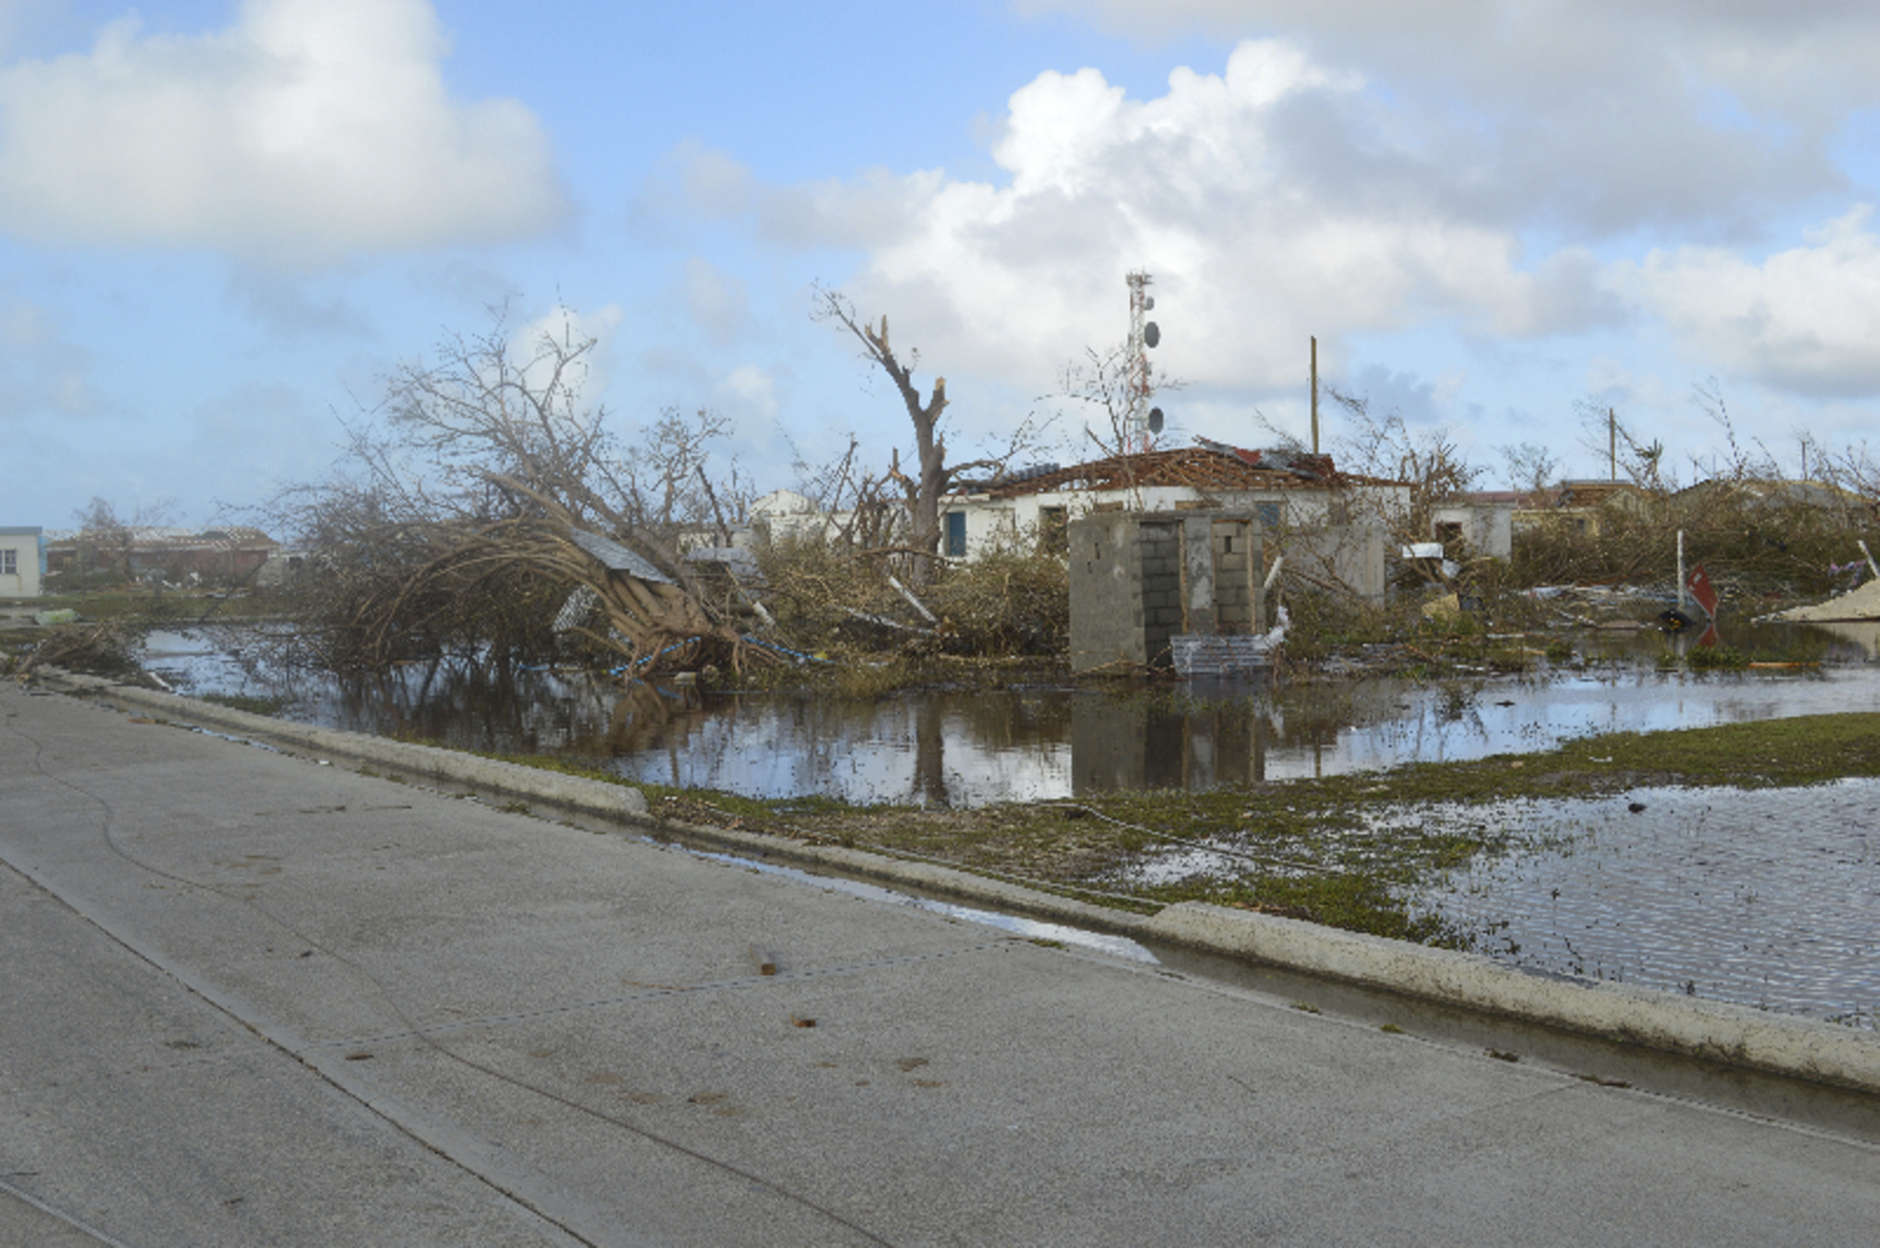 In this Thursday, Sept. 7, 2017, photo, damage is left after Hurricane Irma hit Barbuda. Hurricane Irma battered the Turks and Caicos Islands early Friday as the fearsome Category 5 storm continued a rampage through the Caribbean that has killed a number of people, with Florida in its sights. (AP Photo/Anika E. Kentish)